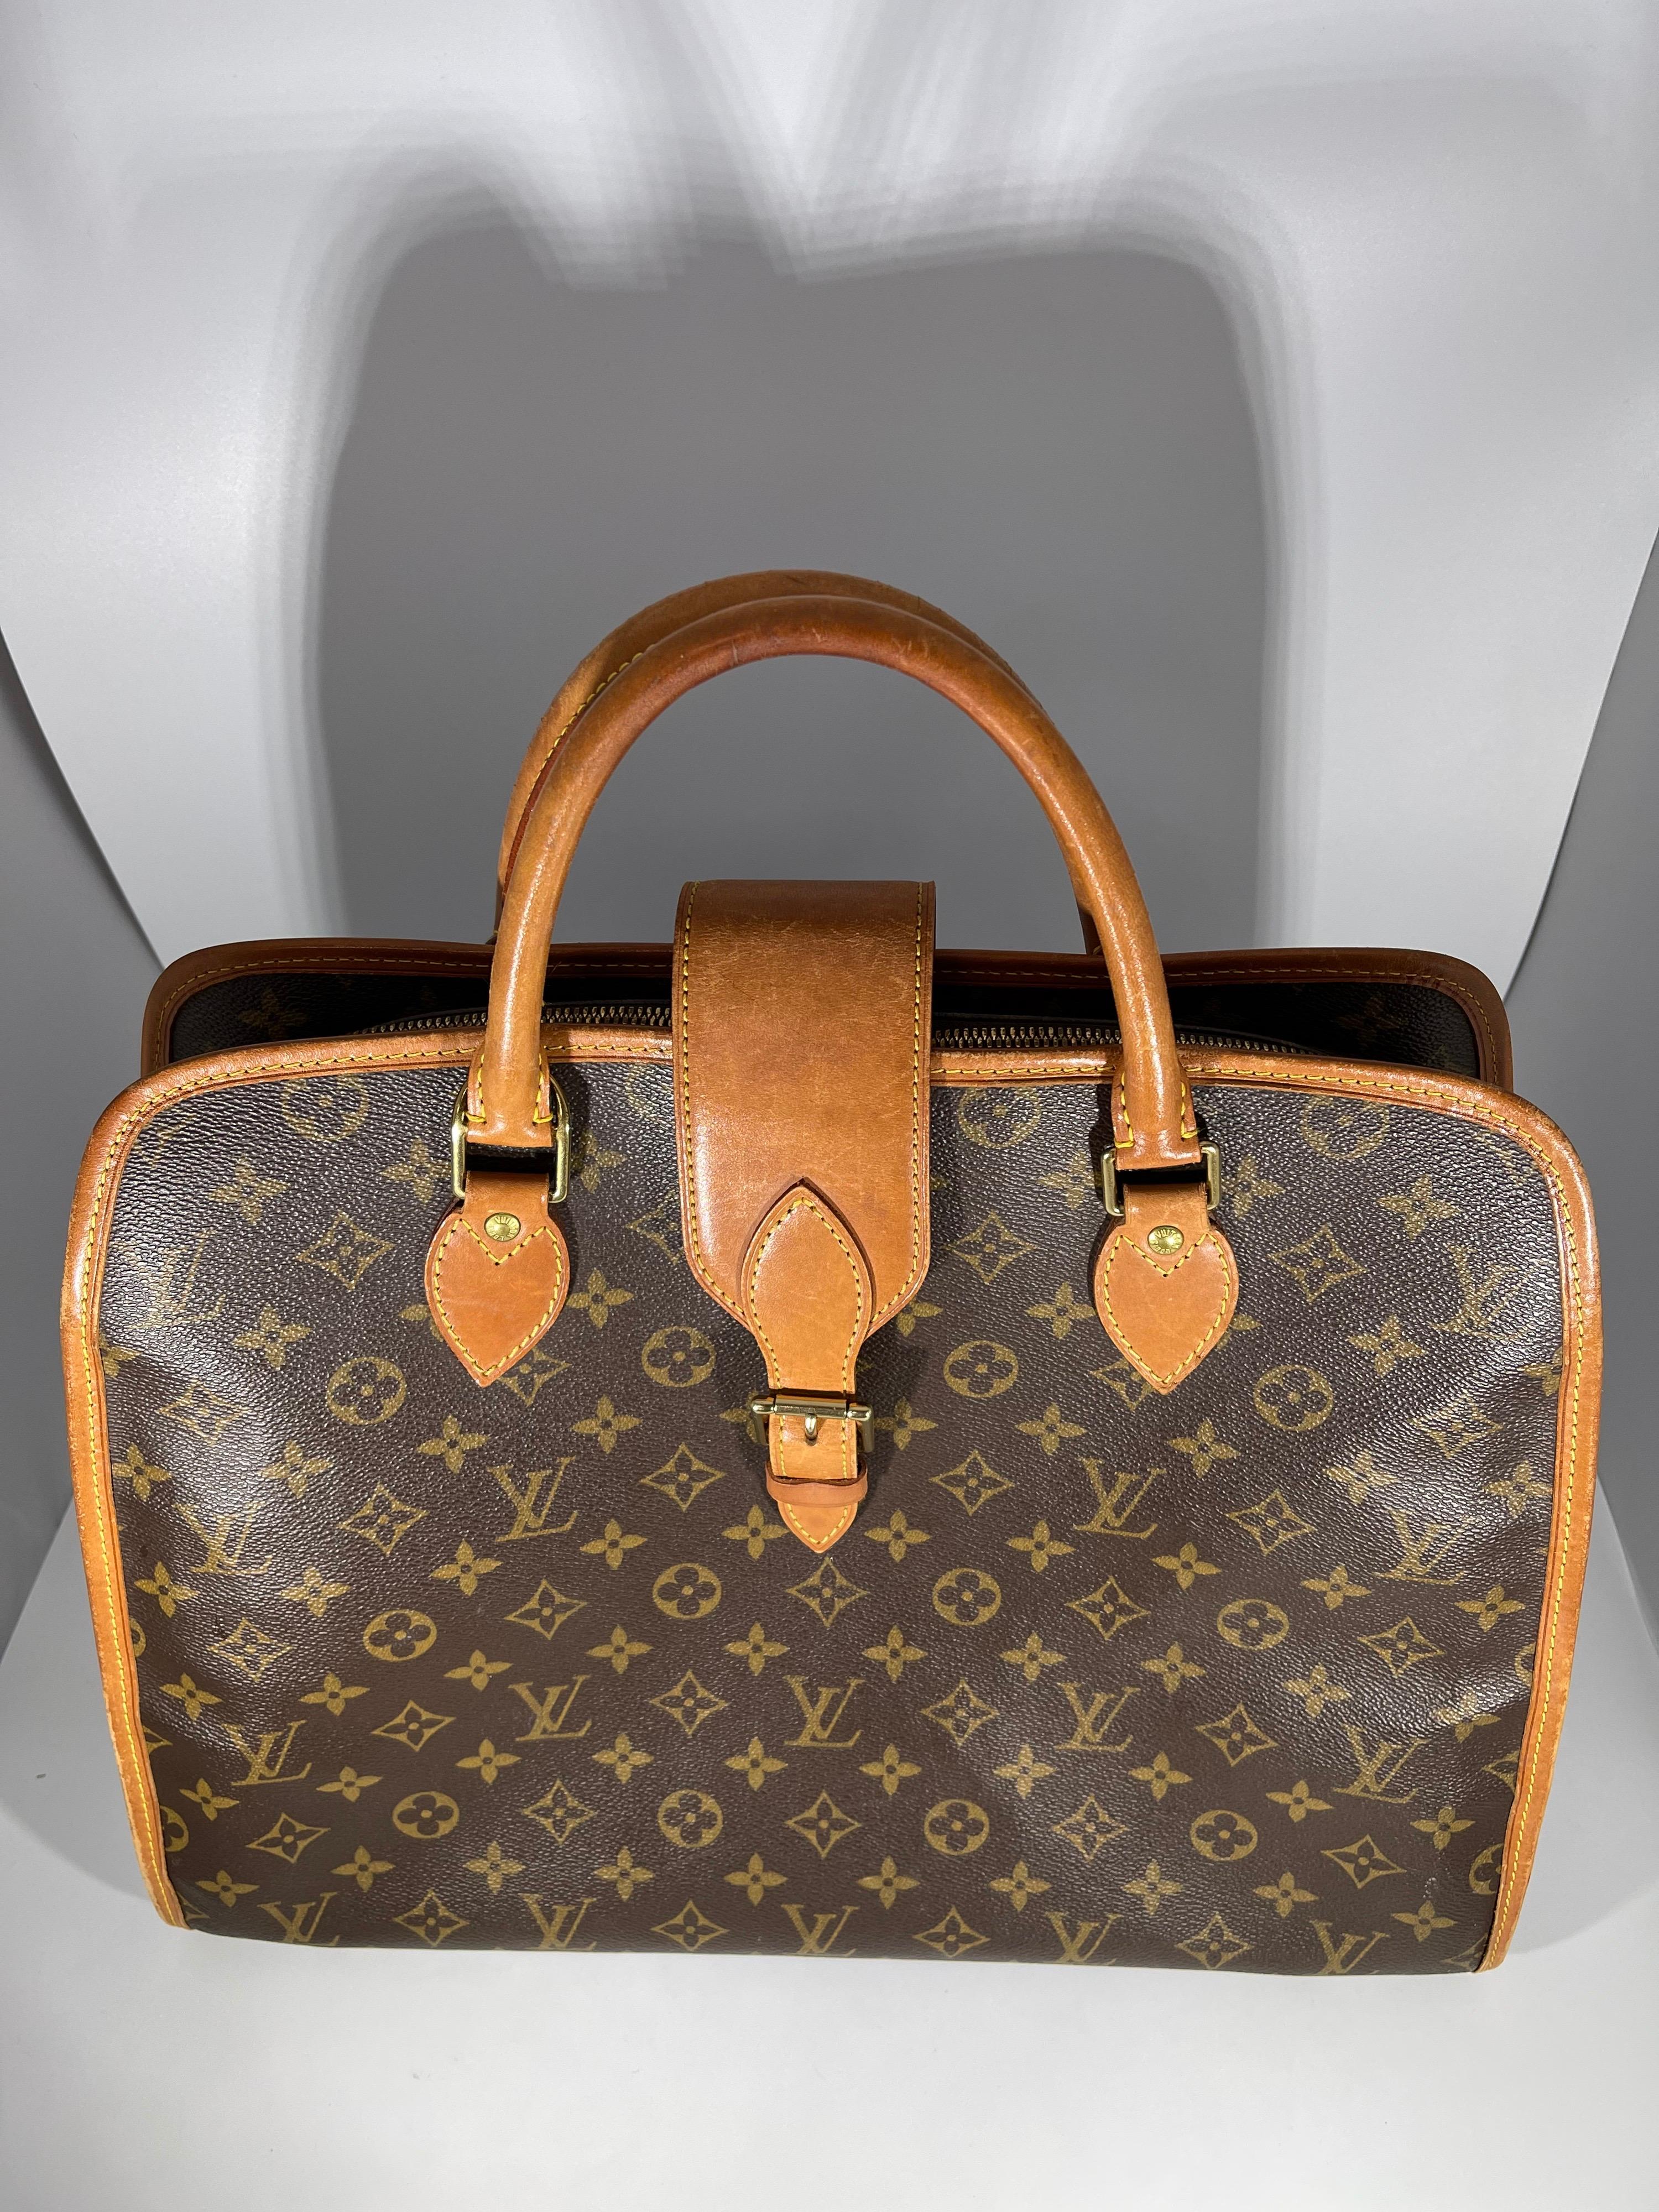 This is an authentic, pre-owned LOUIS VUITTON 
I think this is one of the best Louis Vuitton products. A vintage piece that is perfect for the career professional that wants an extra touch of class as you go about your day. I use mine instead of a